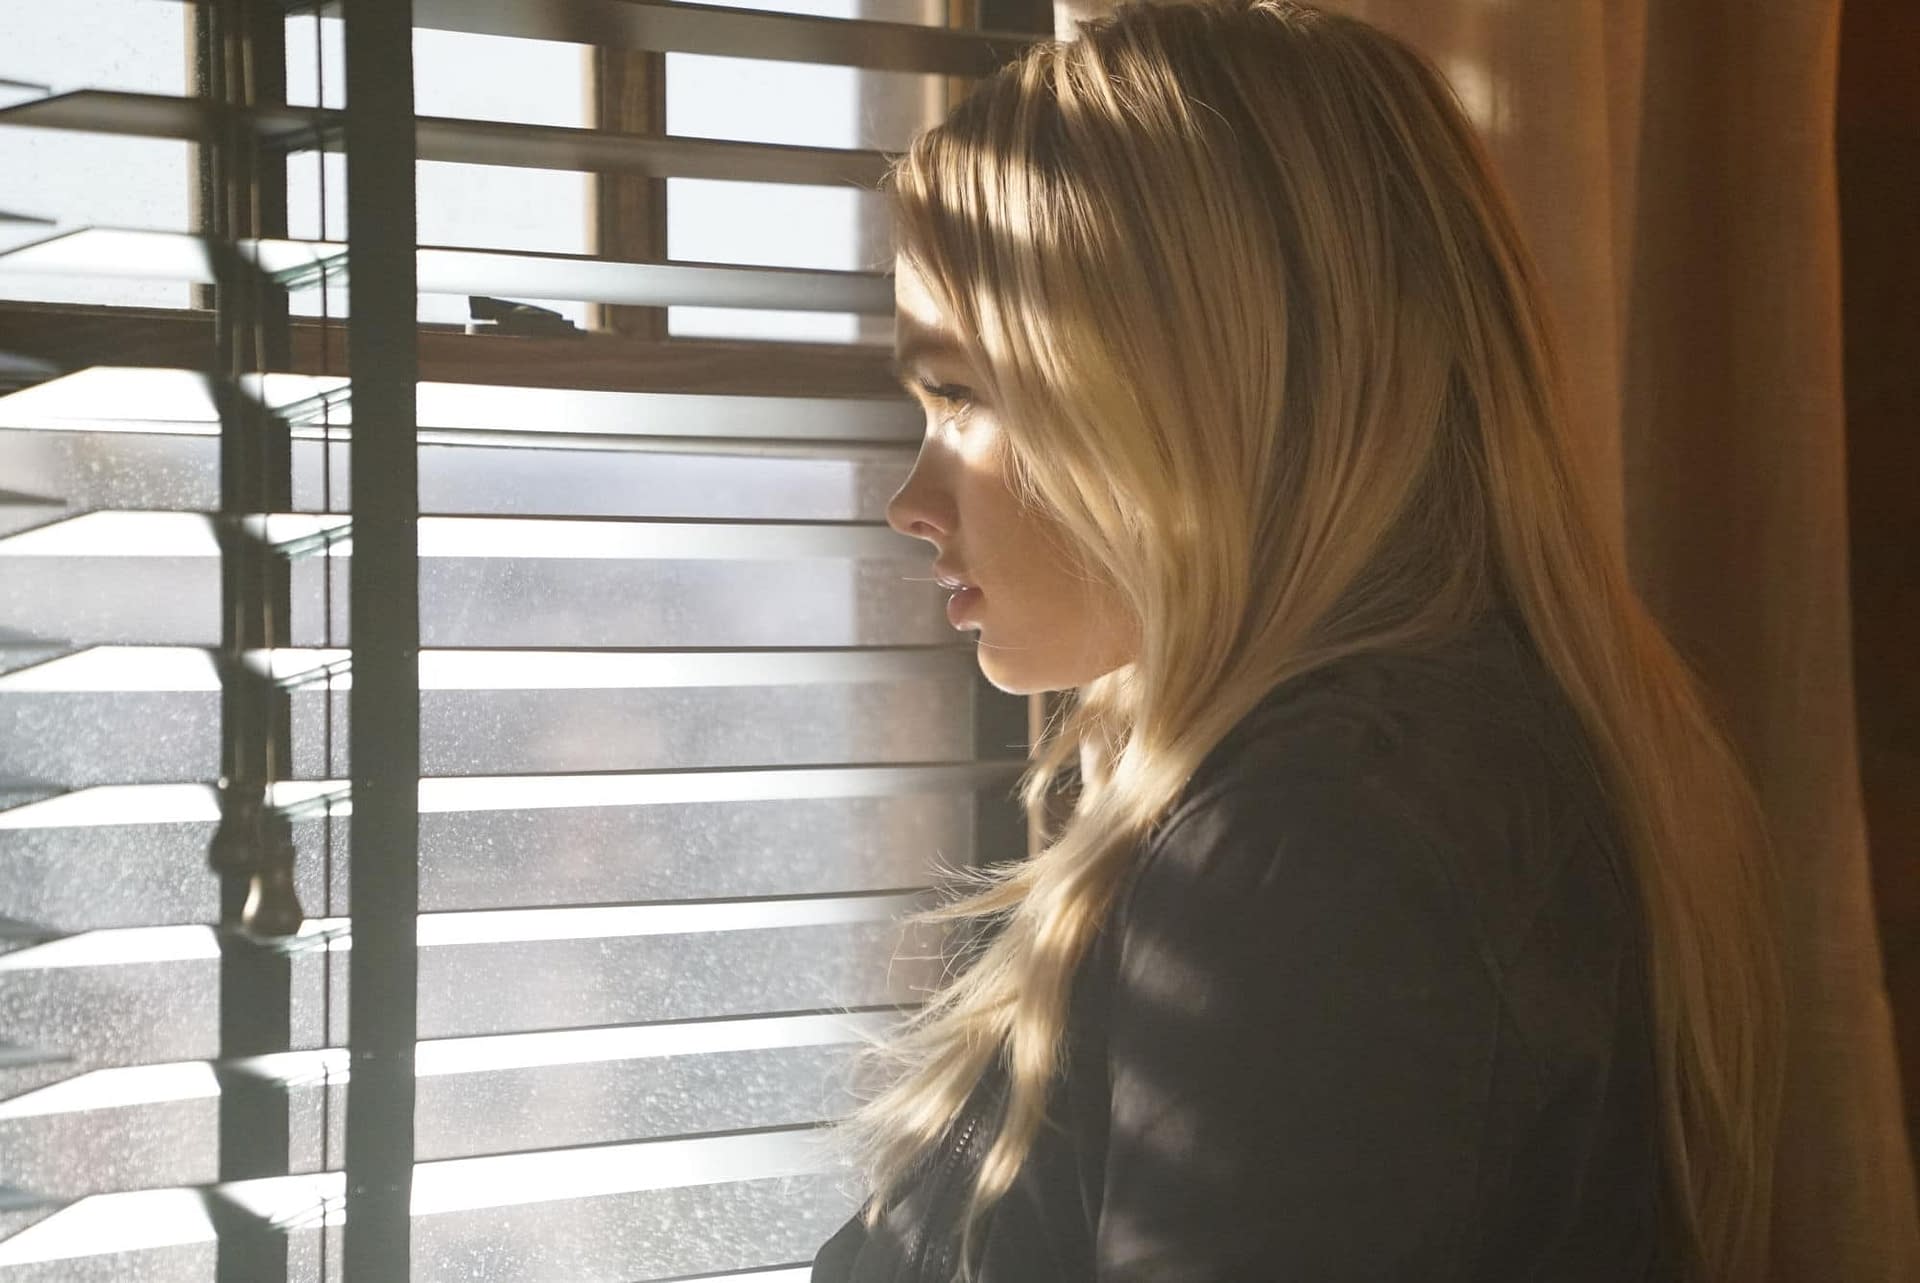 The Gifted Season 2 Episode 16: Promo, Summary, 7 New Images, and Time for the Season Finale